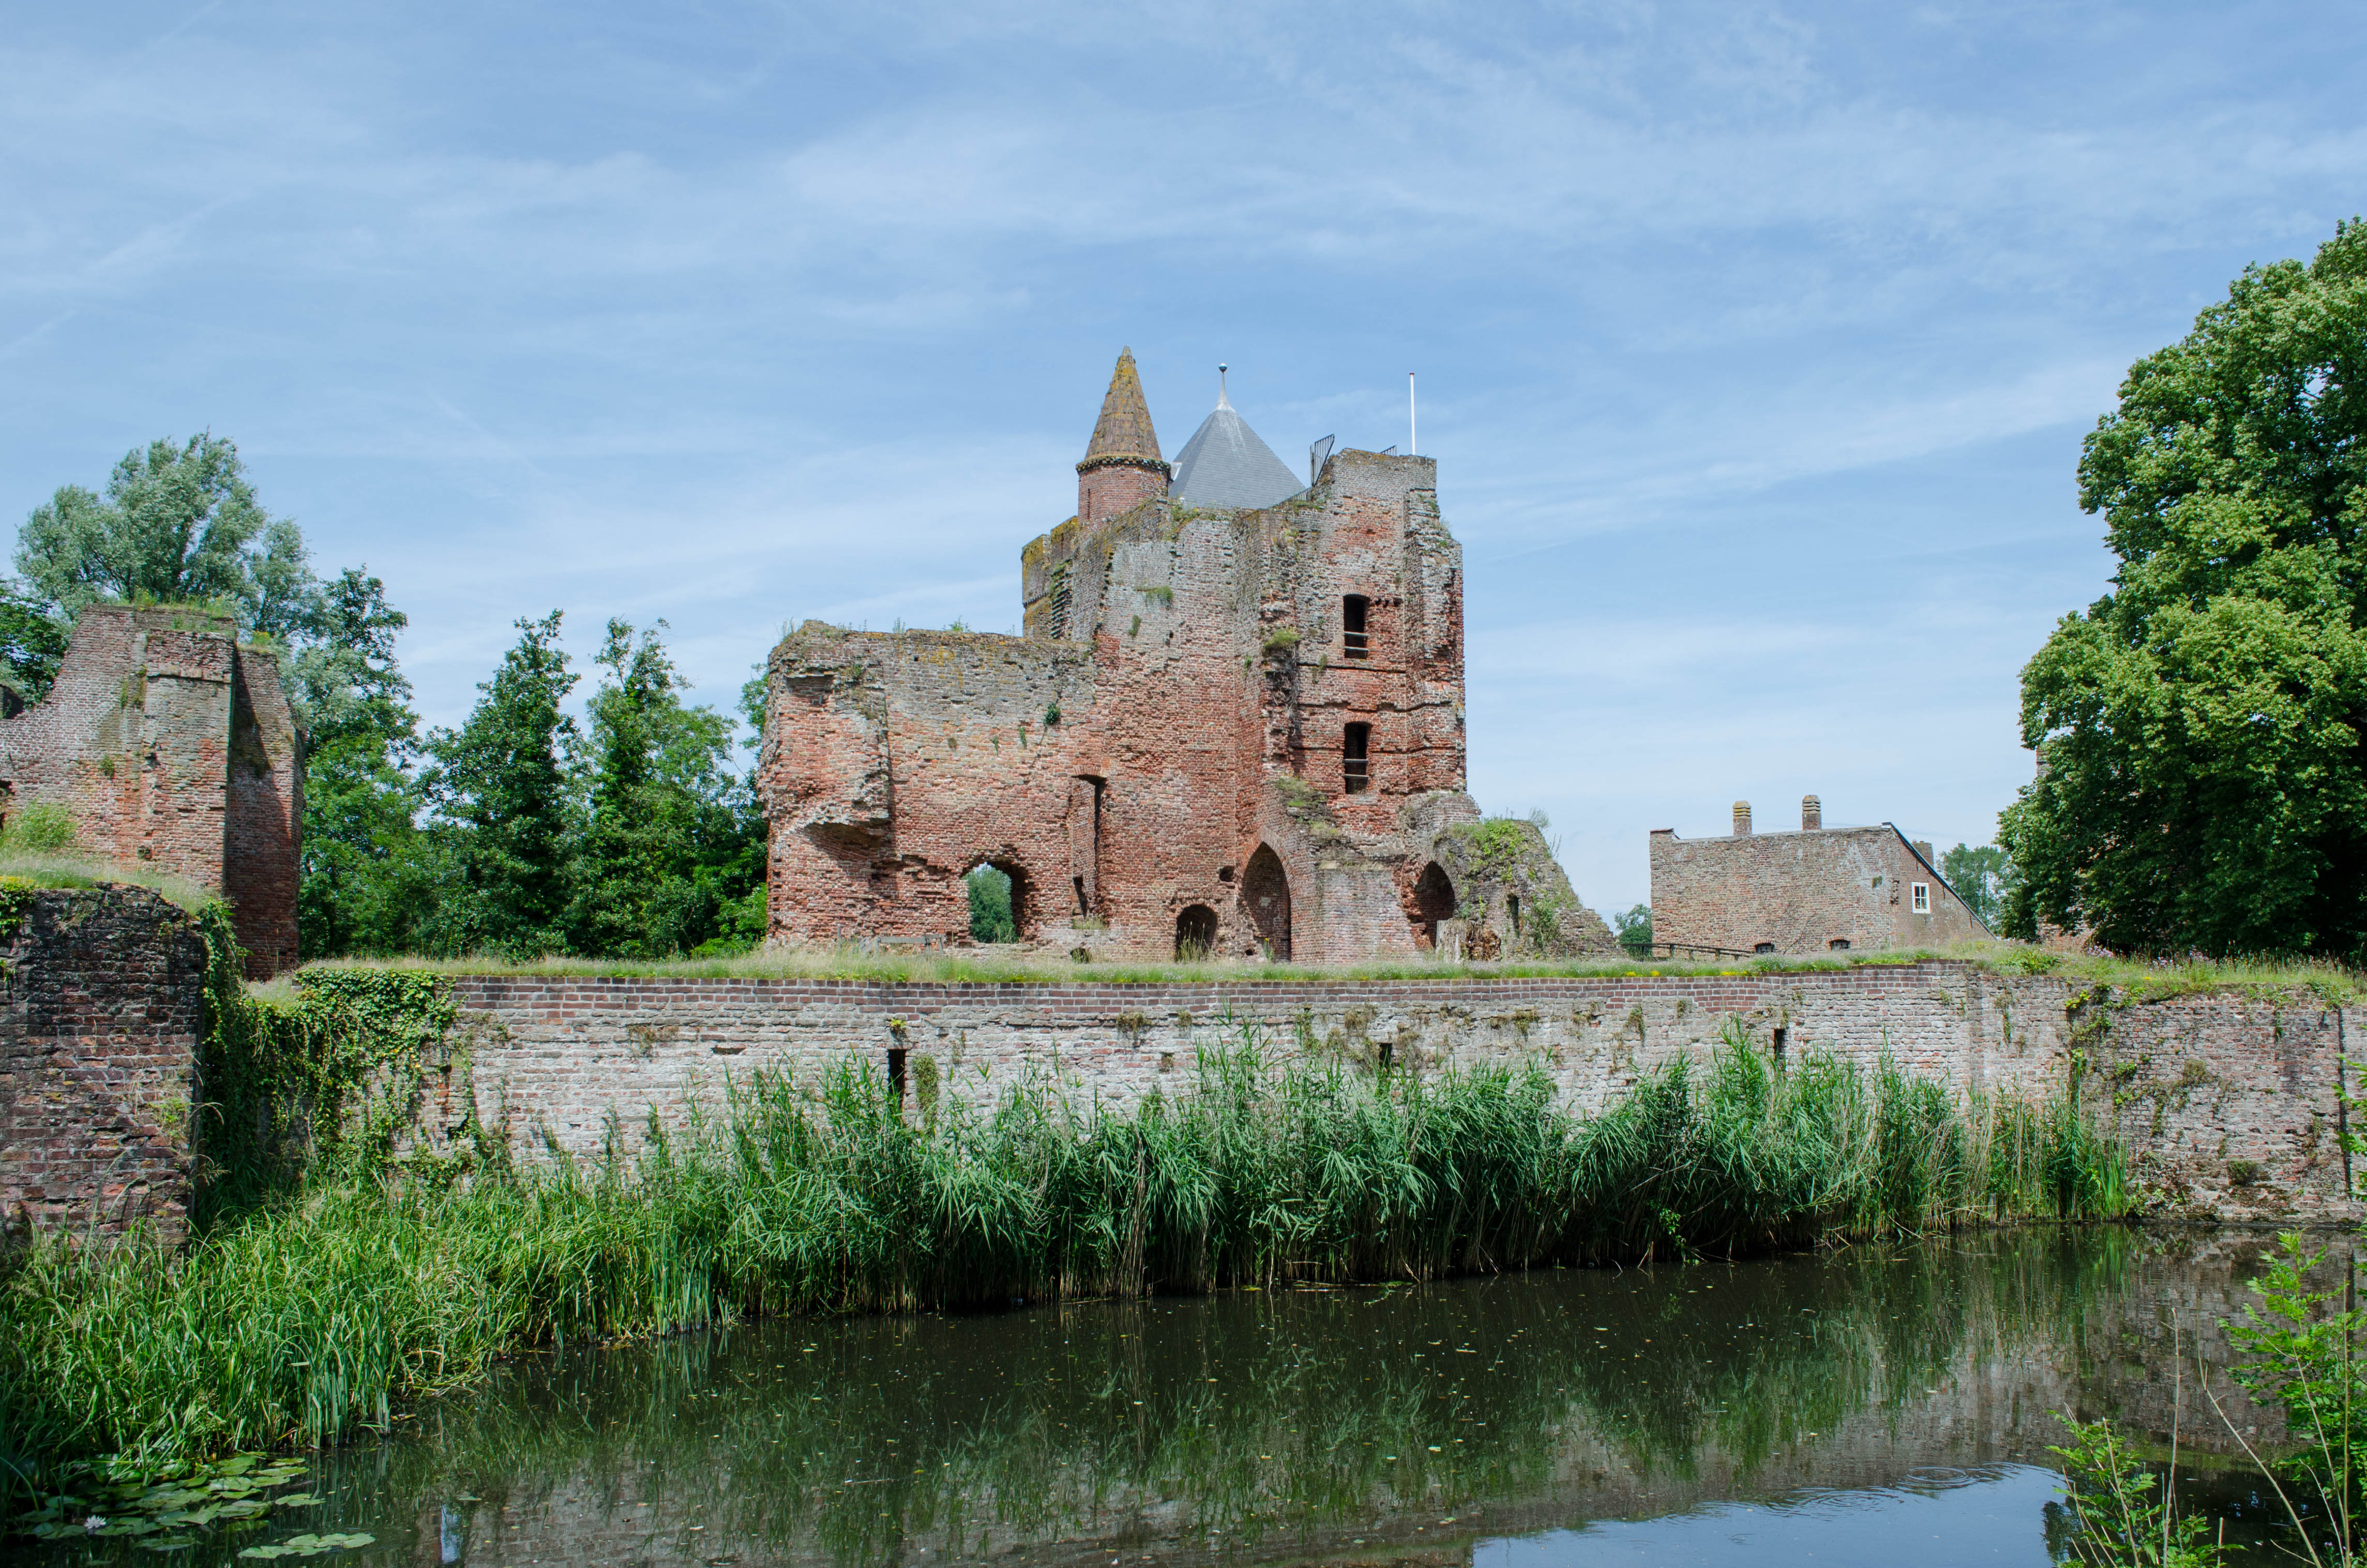 The ruins of Brederode Castle, or de Ruïne van Brederode as it's known in Dutch, can be seen outside Haarlem in the Netherlands